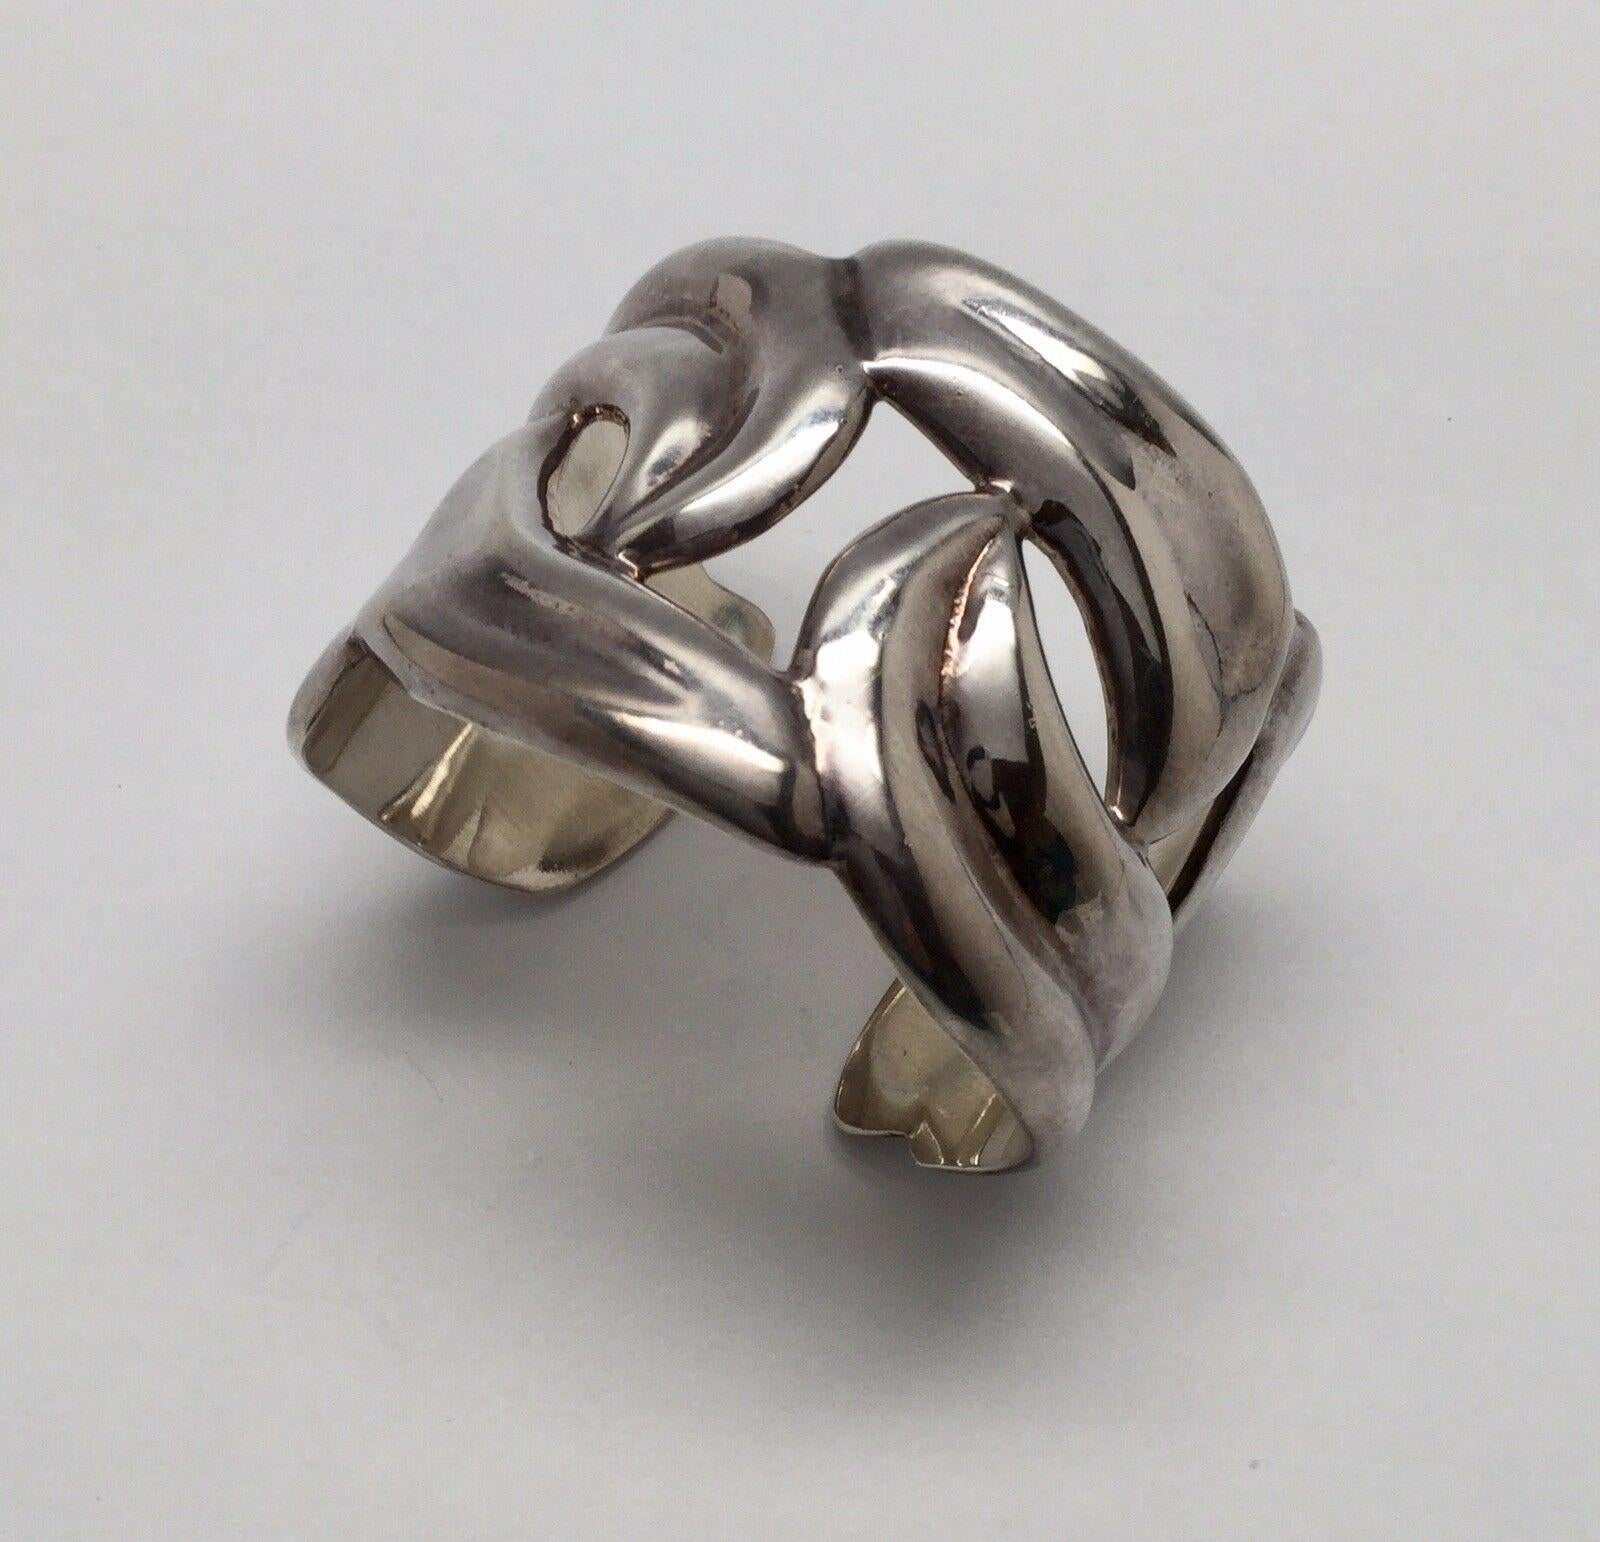 Mexico sterling silver cut out swirl cuff bracelet by CMV.

Marked: Sterling, CMV Mexico

Measures: 5 1/2